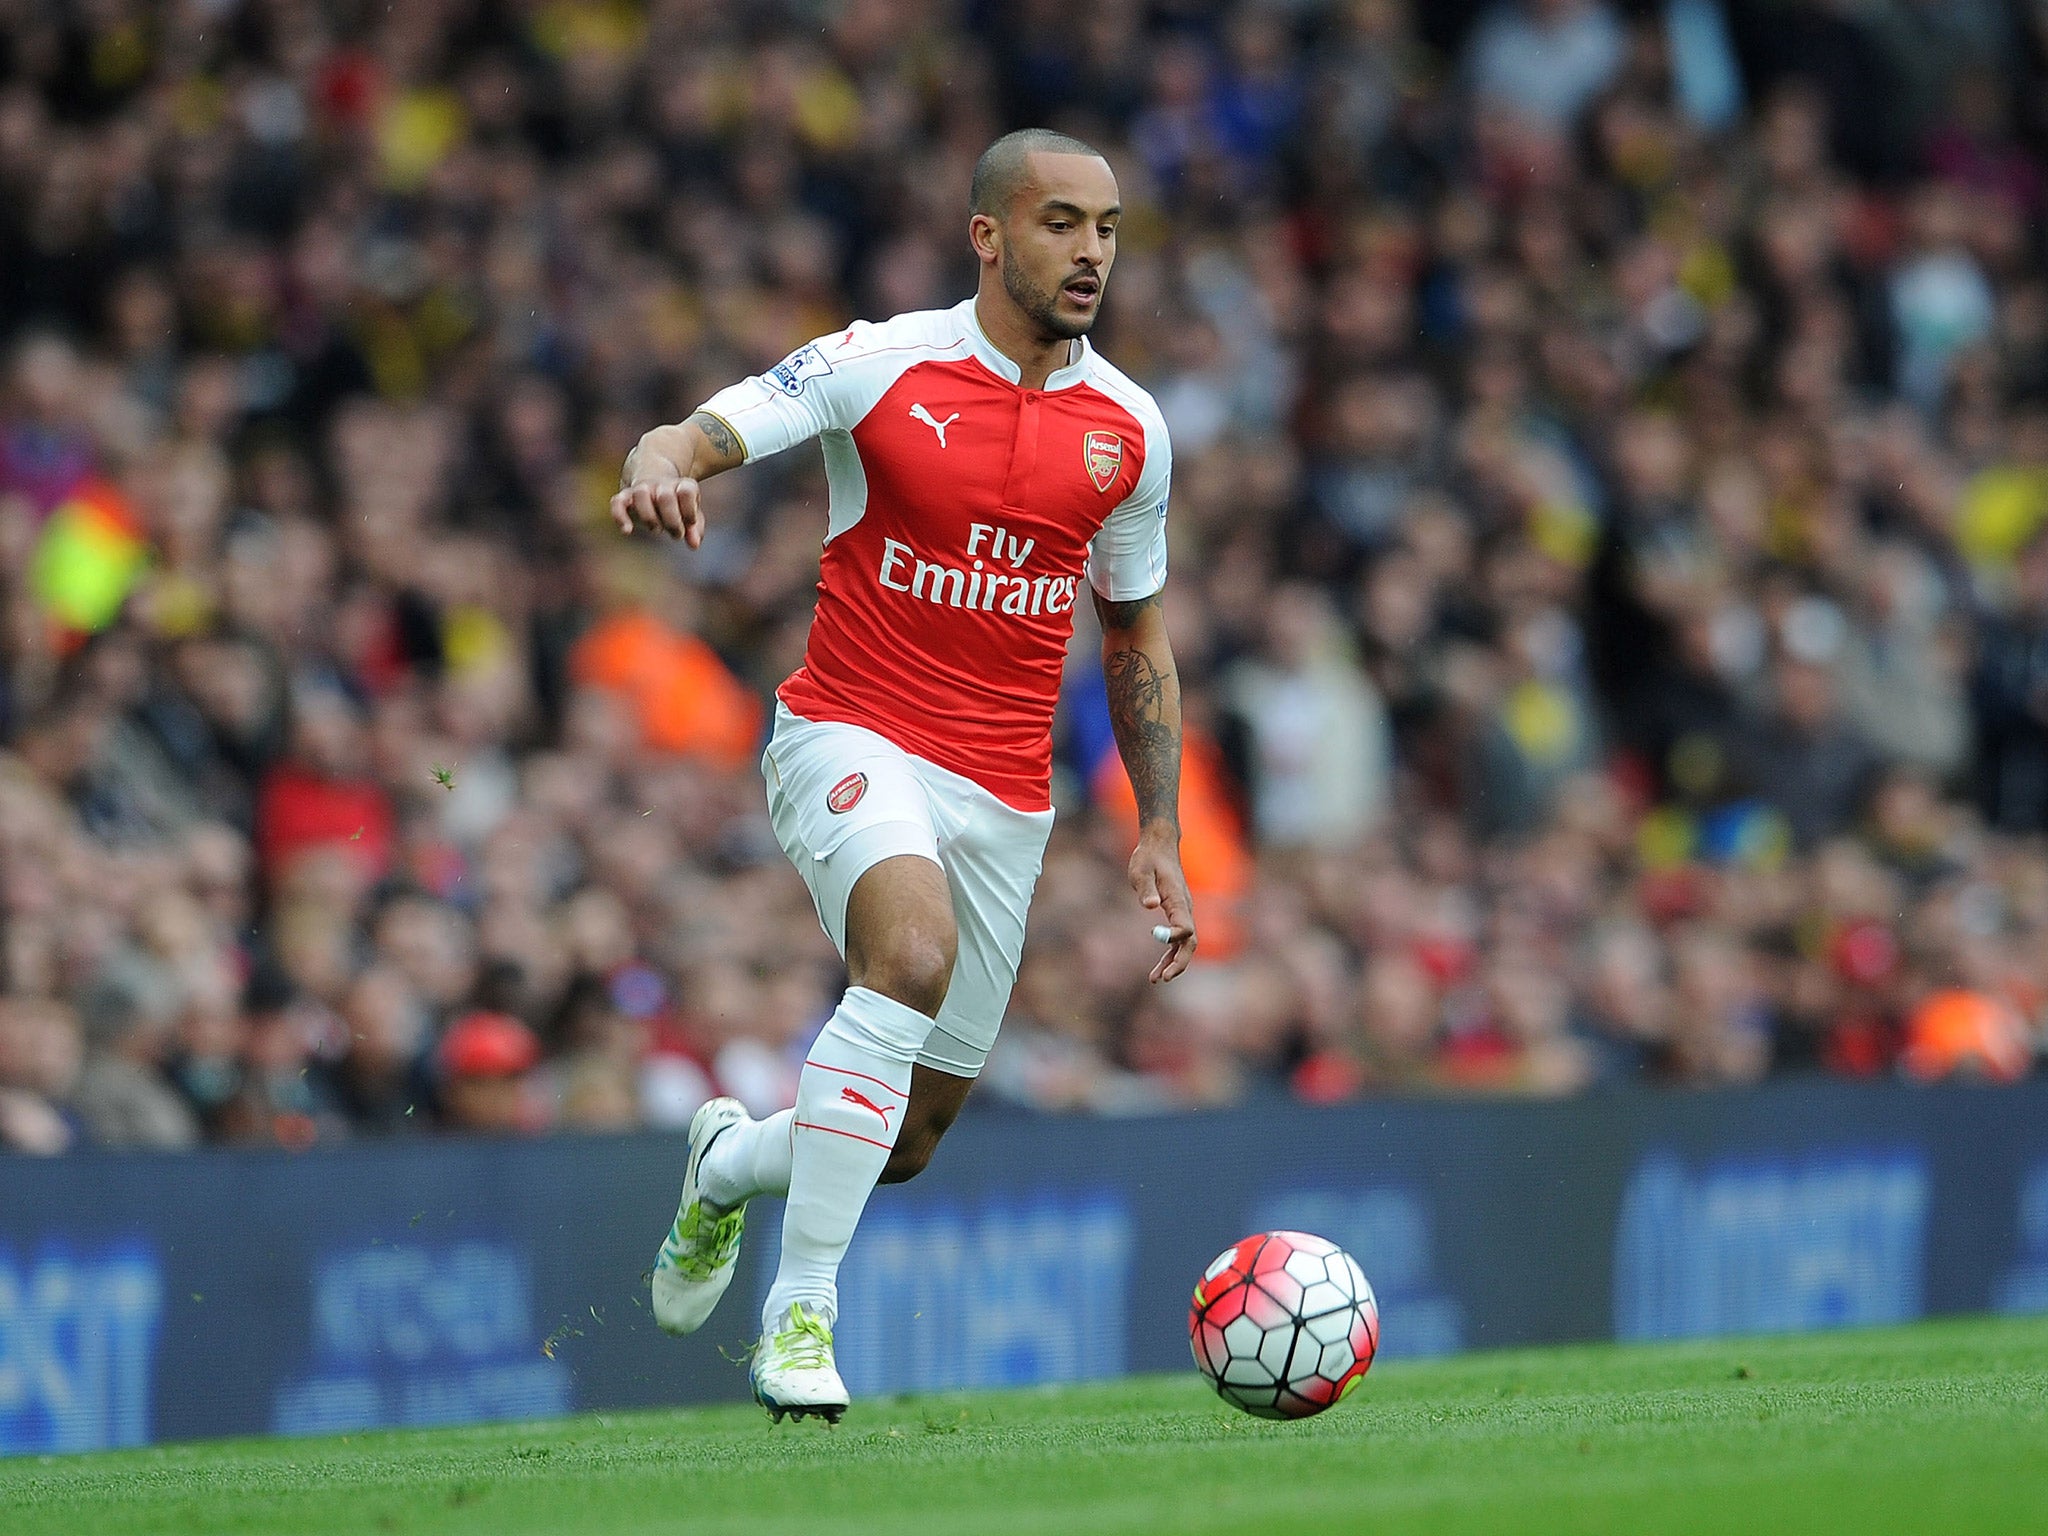 Theo Walcott has played over 230 times for Arsenal over a 10-year period